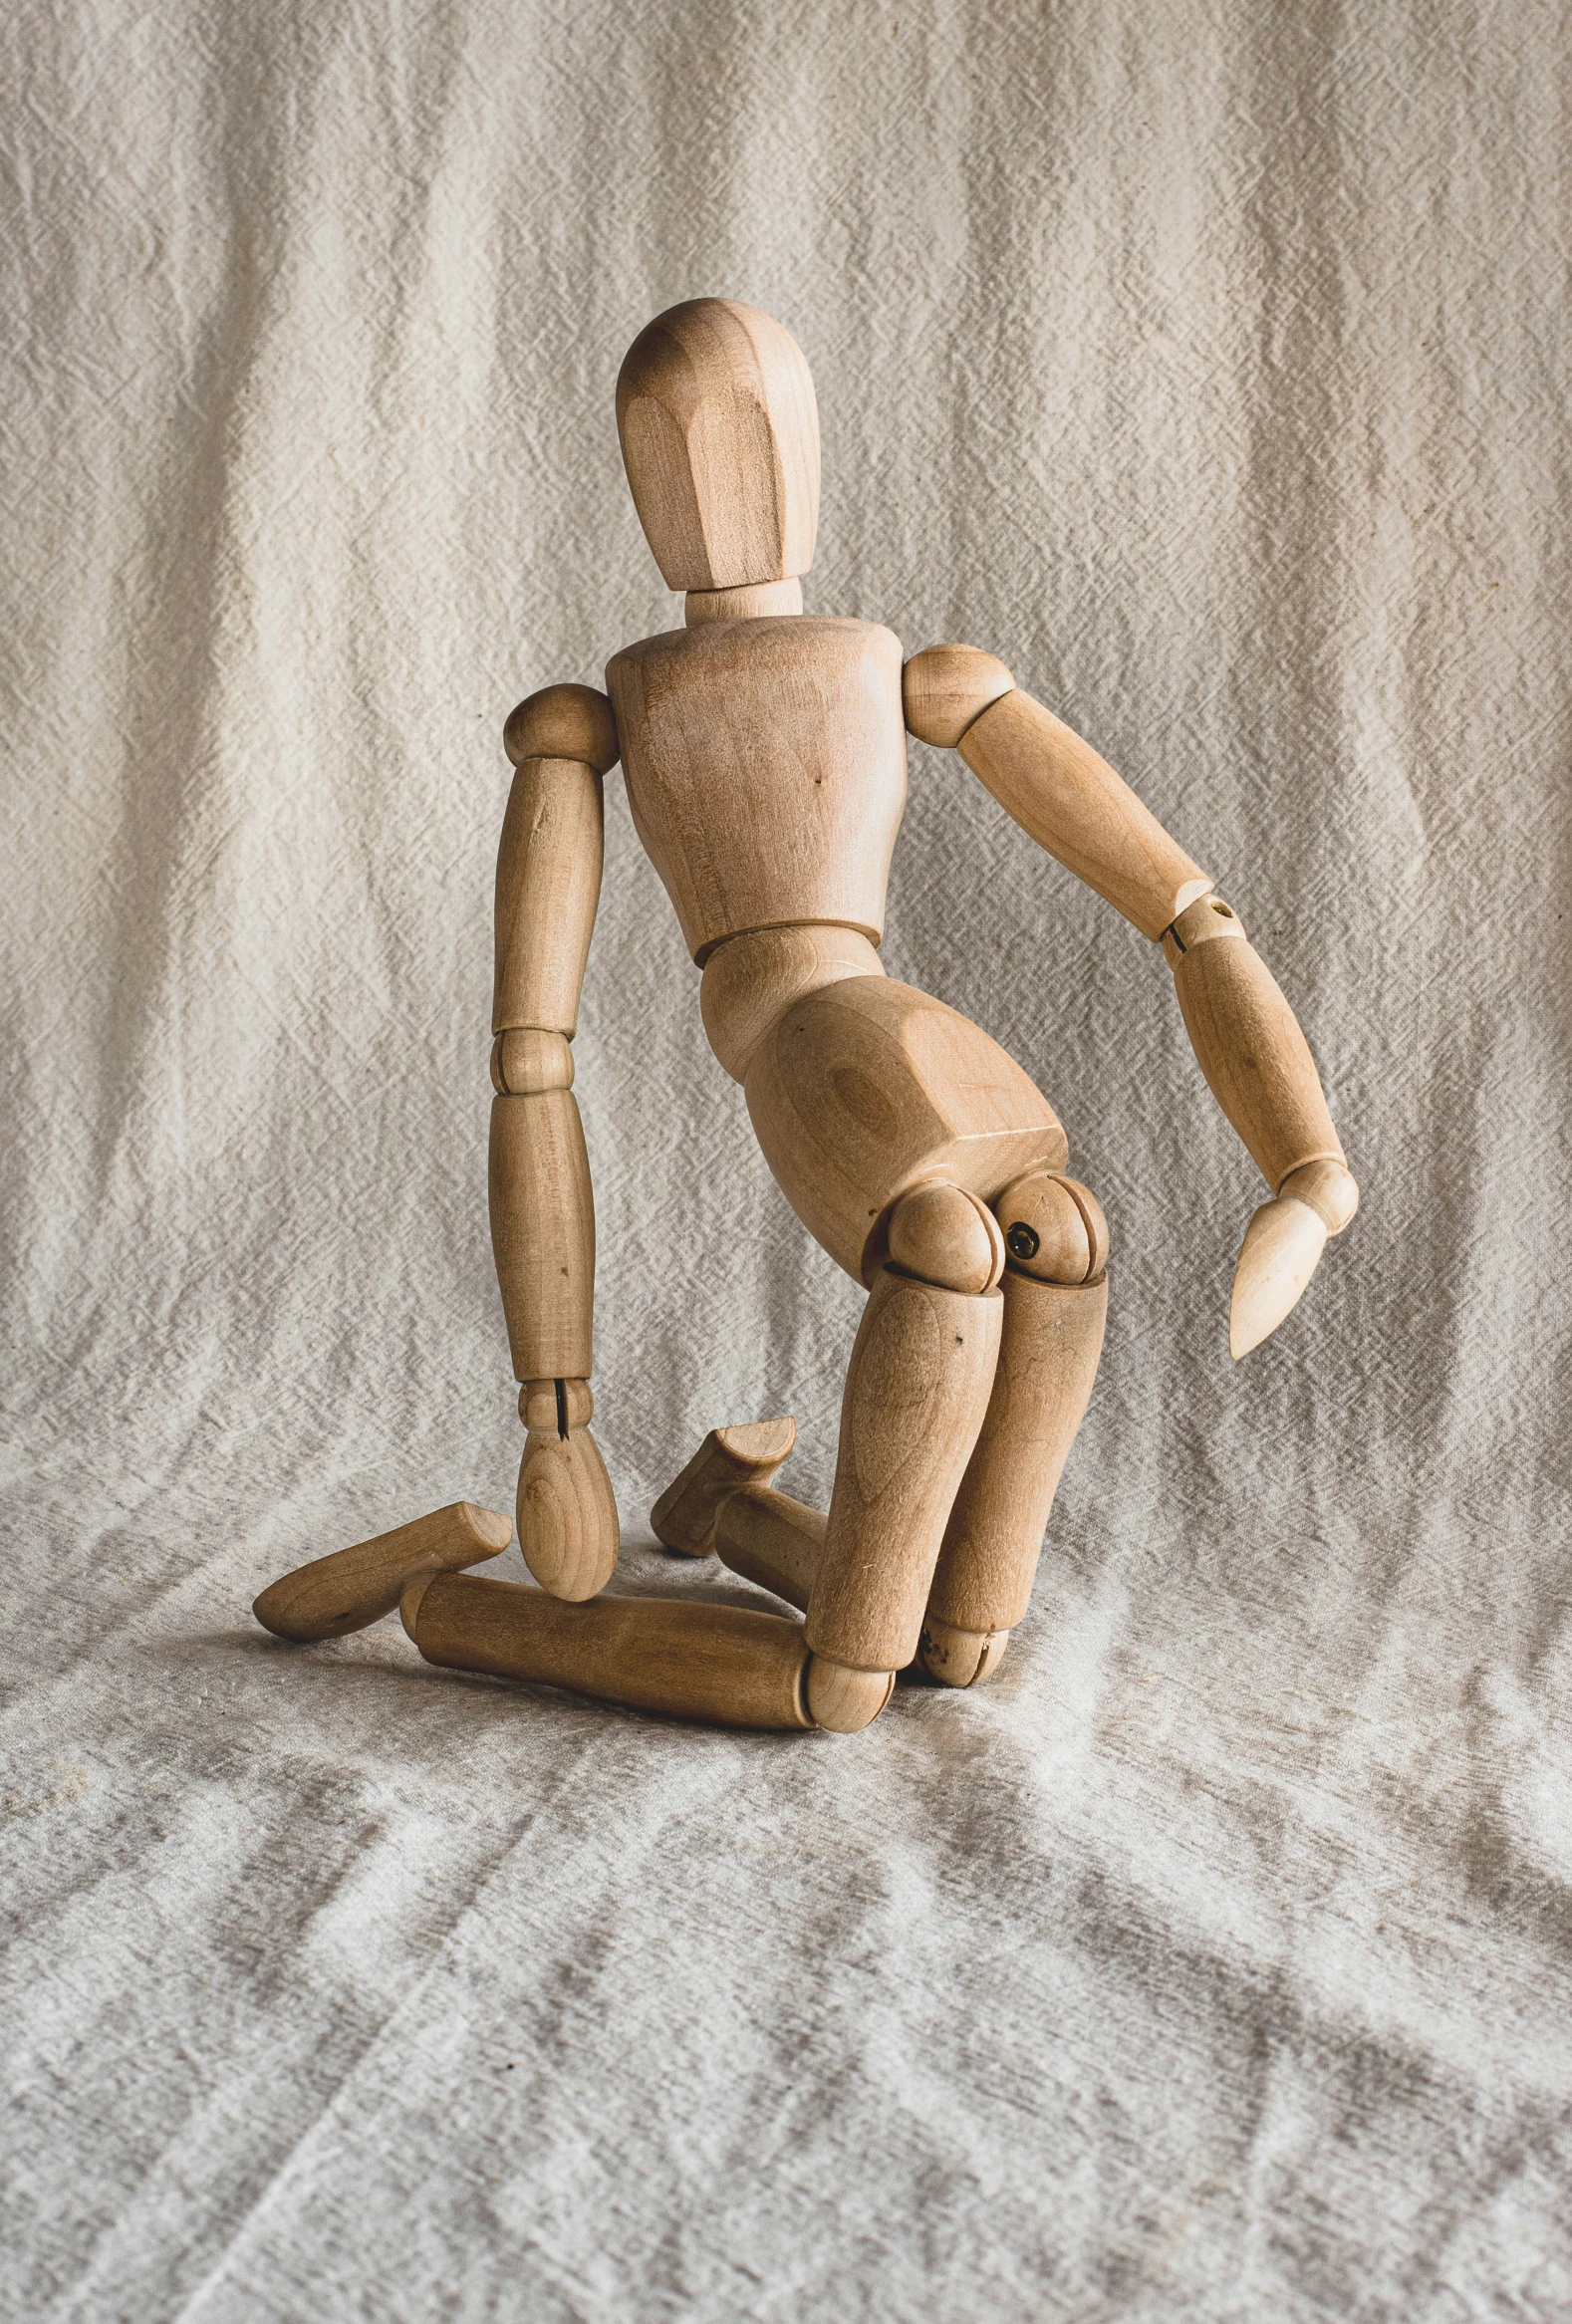 the wooden articulated doll is posed for pos